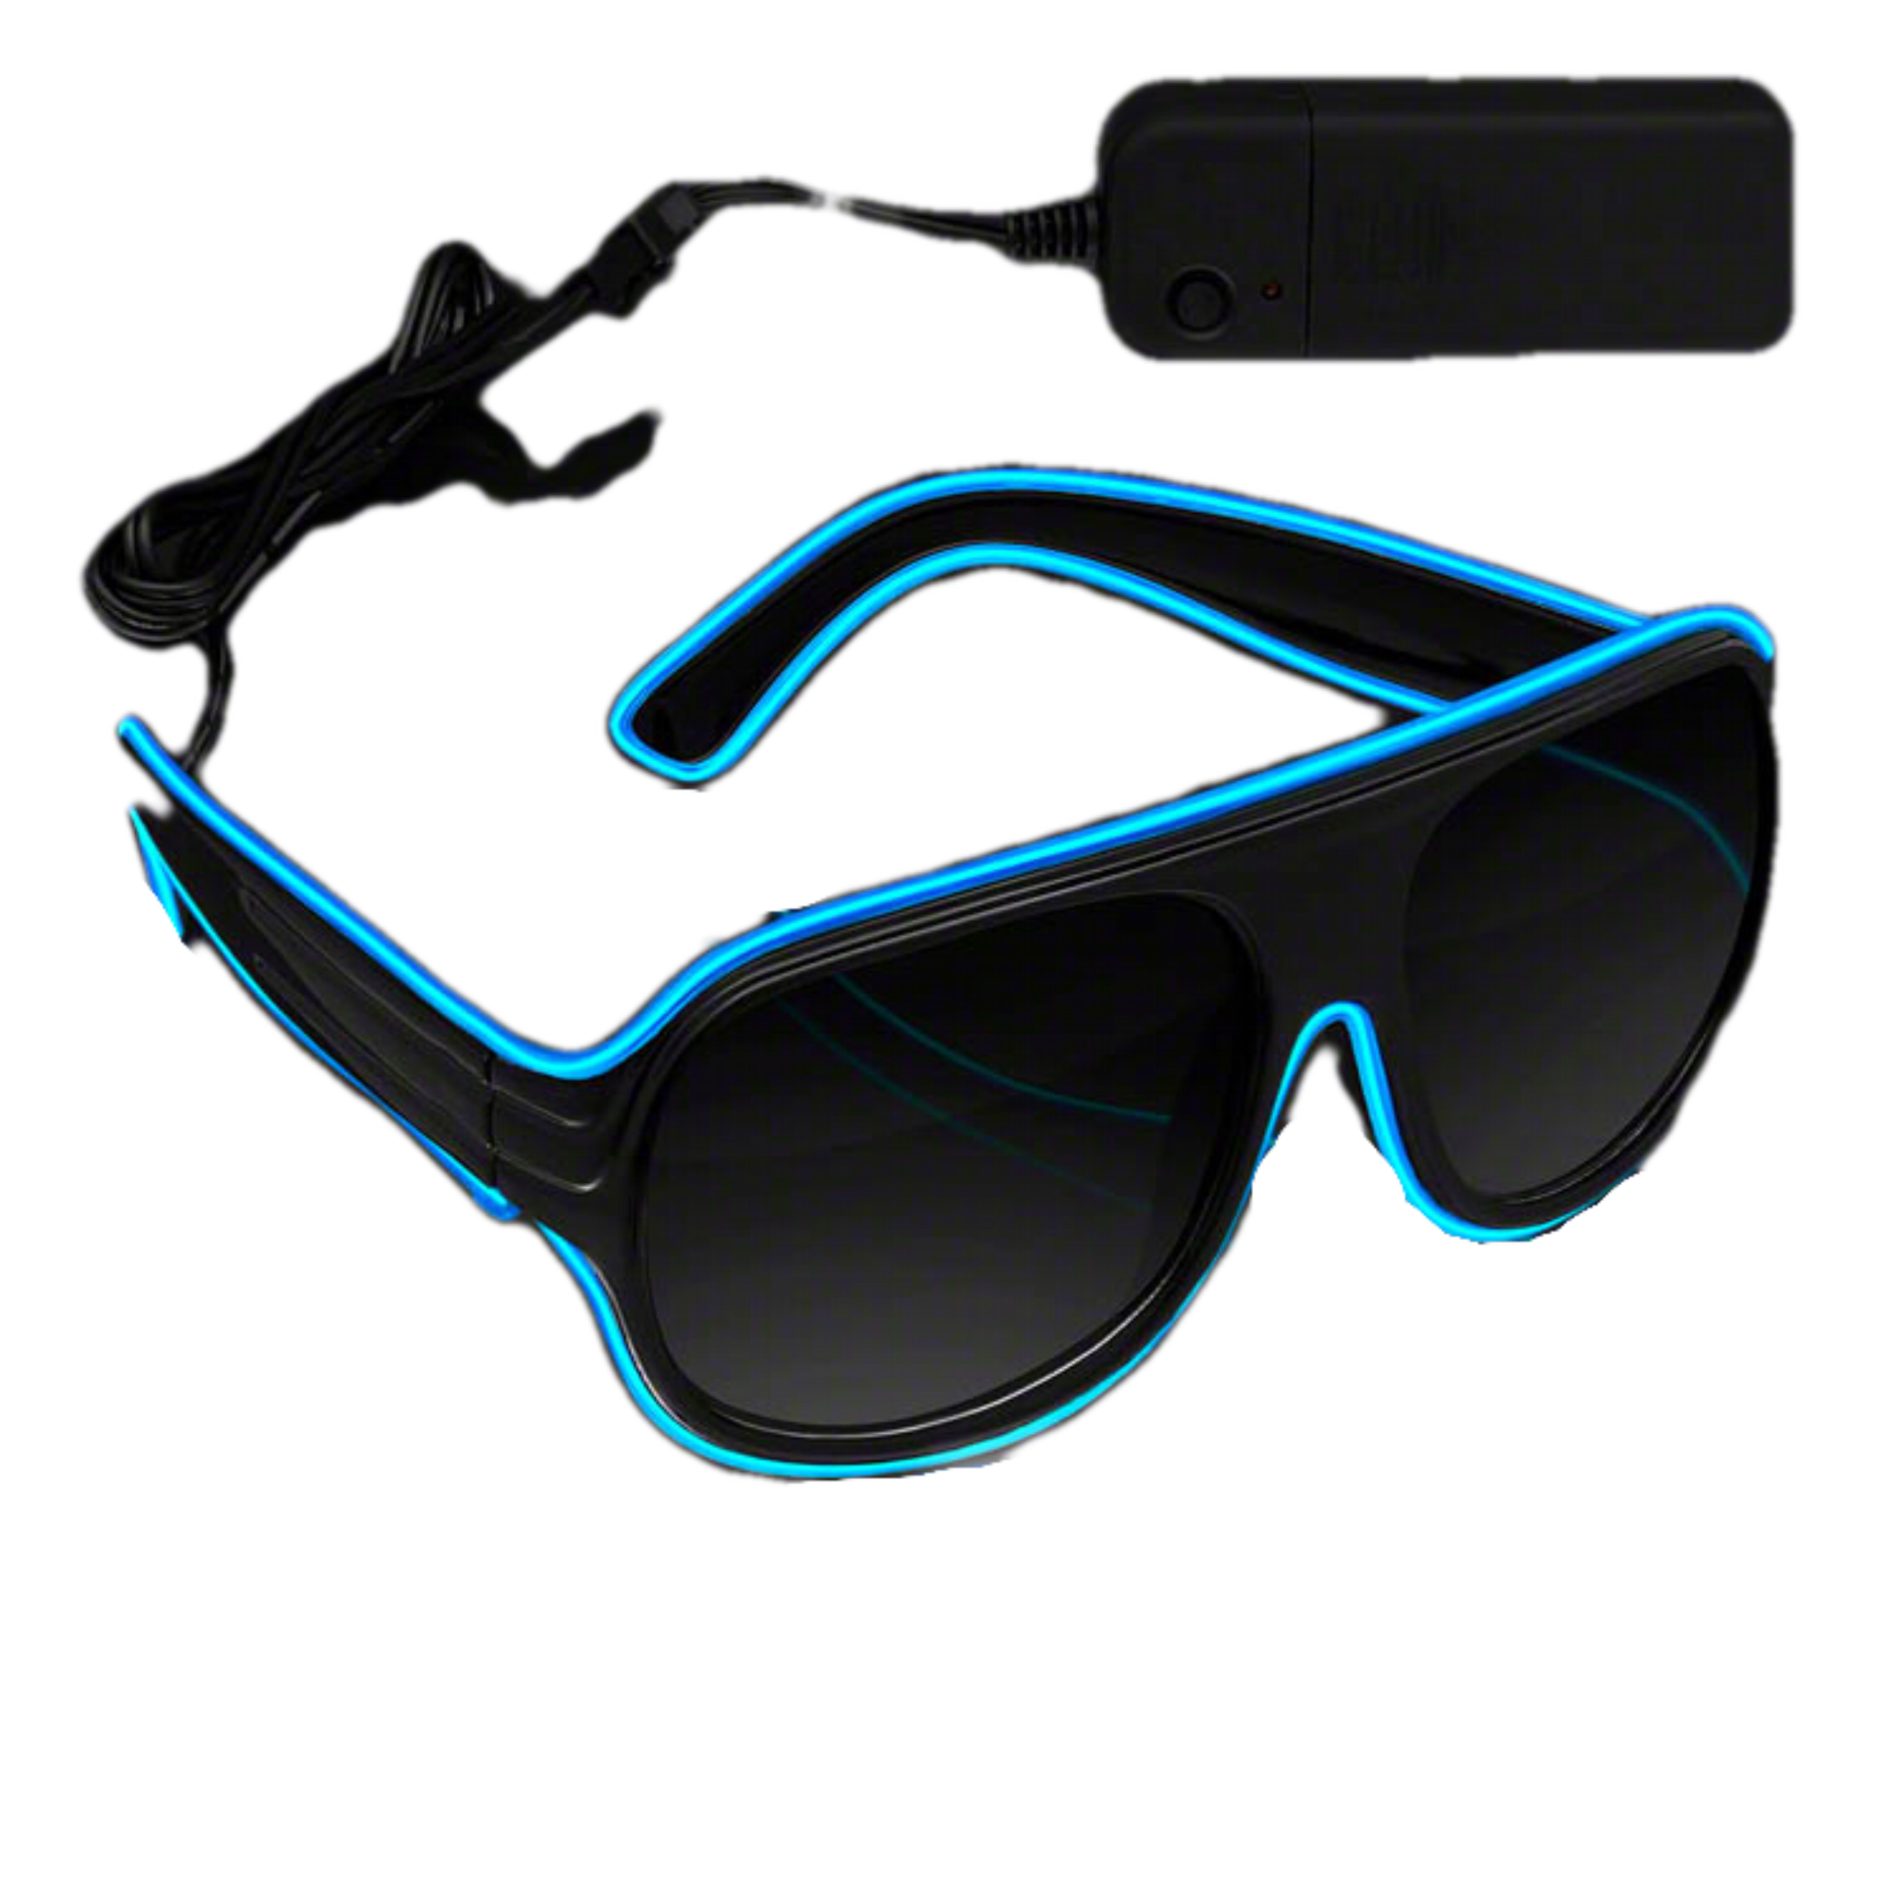 Electro Luminescent Banray Sunglasses Blue All Products